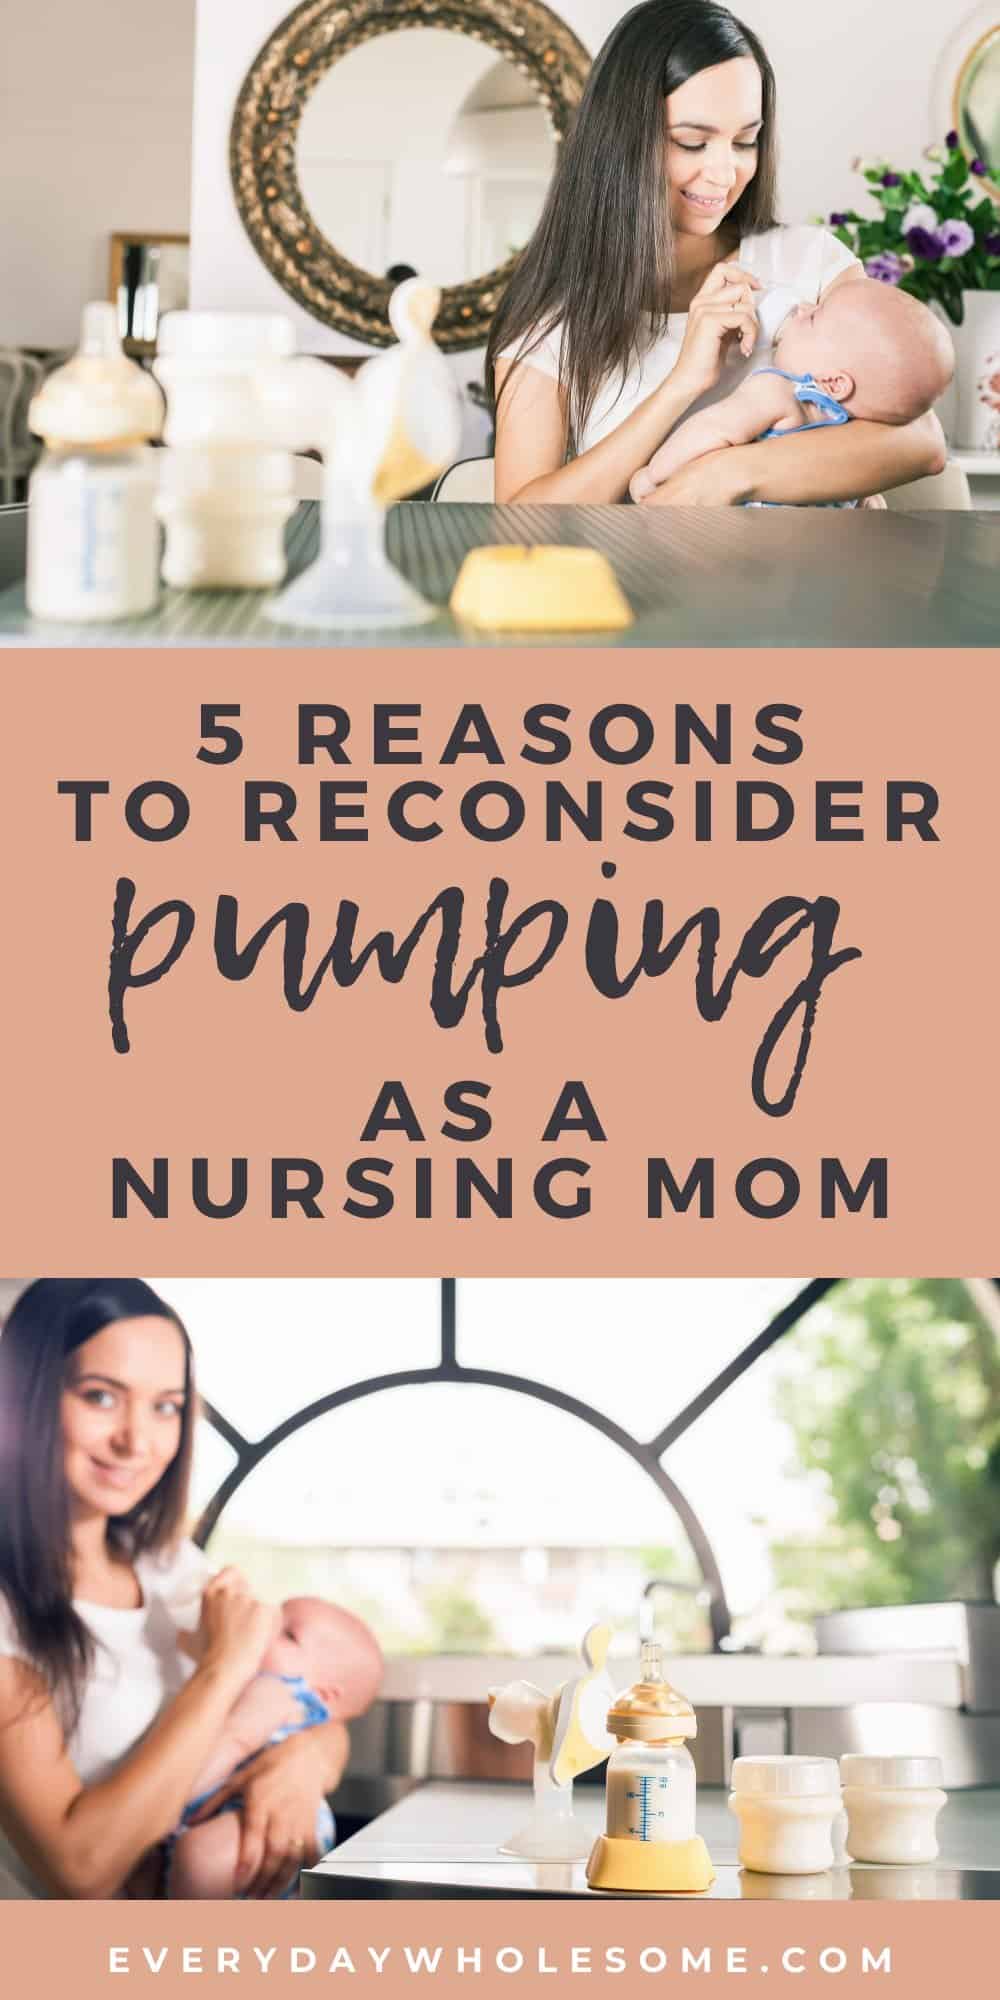 5 reasons to reconsider pumping as a nursing breasted mom